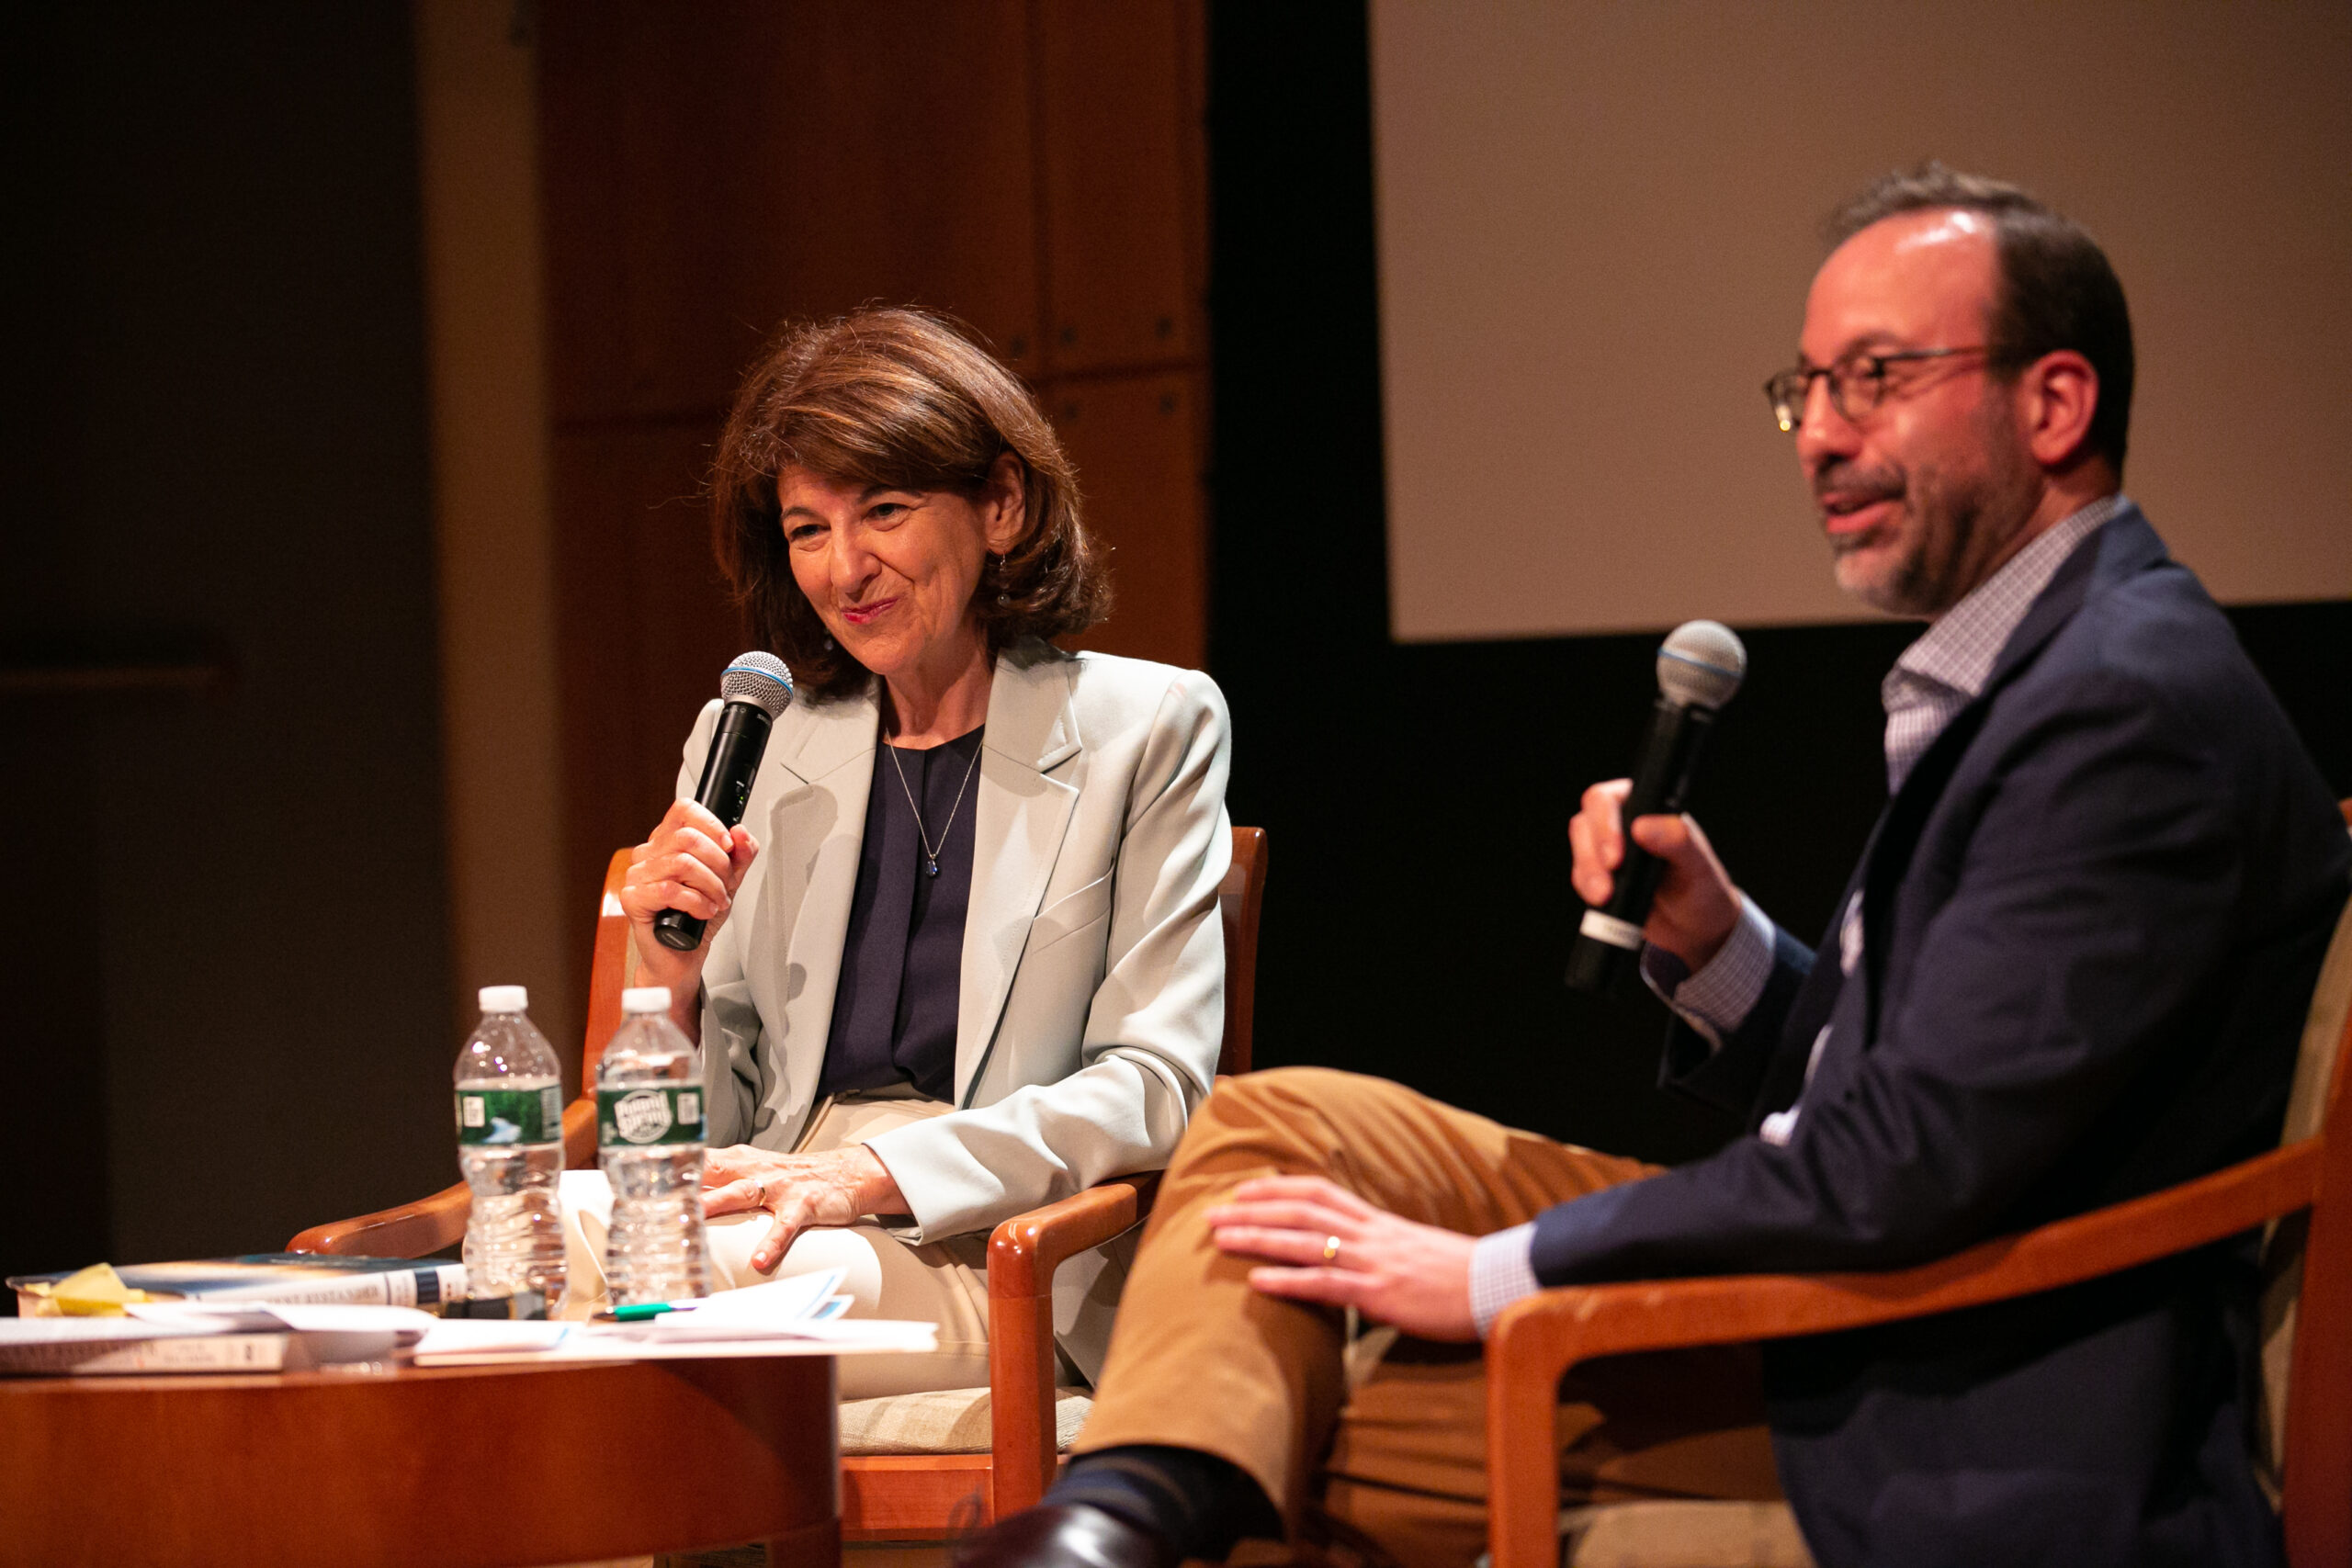 Julie in conversation with Warren Bass at June 11 launch of "An Innocent Bystander" at the Center for Jewish History